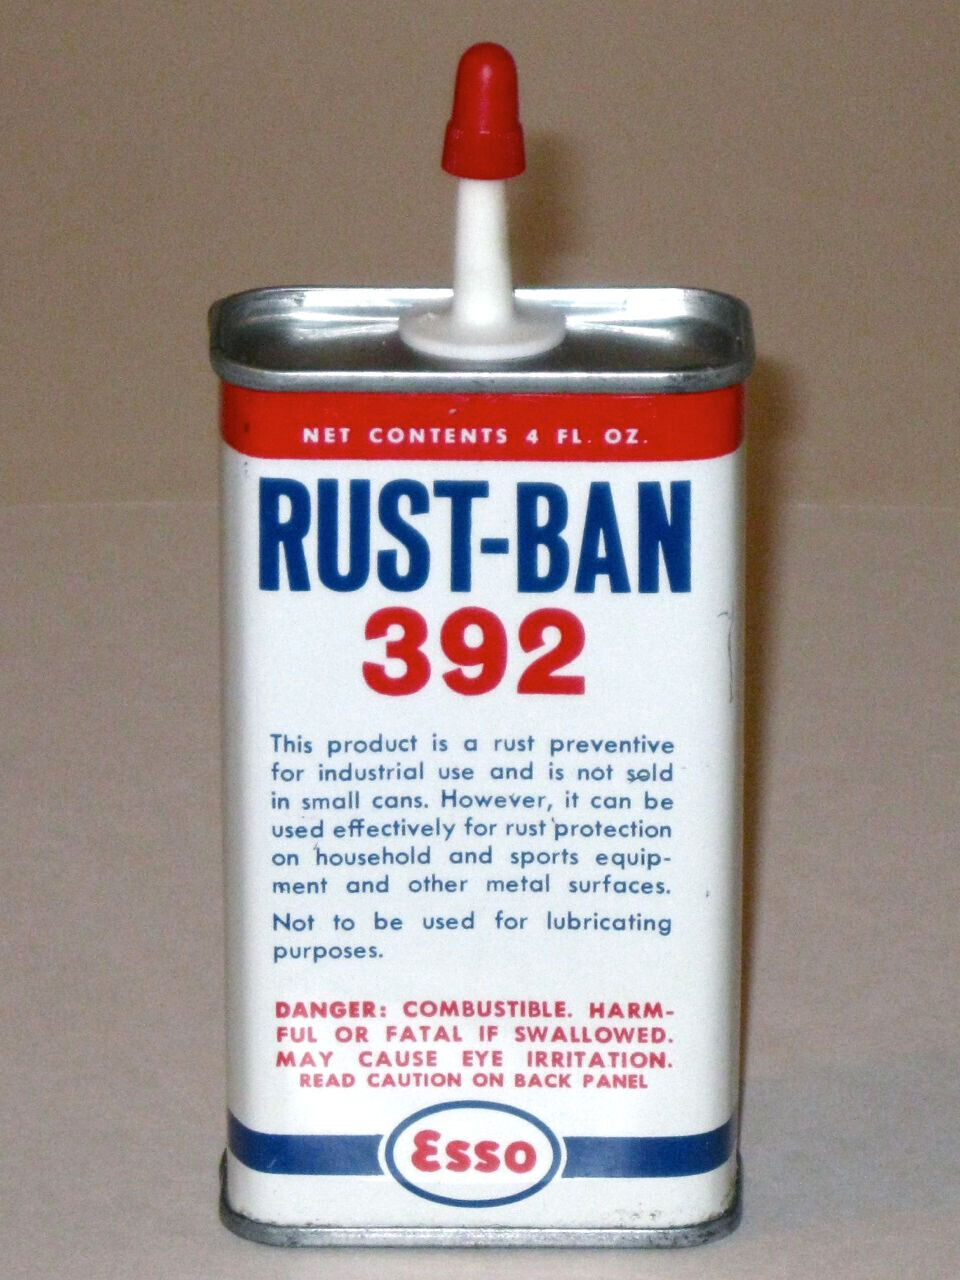 Vintage 1950s ESSO Rust-Ban 392 Advertising Tin OIL Can HUMBLE OIL & Refining